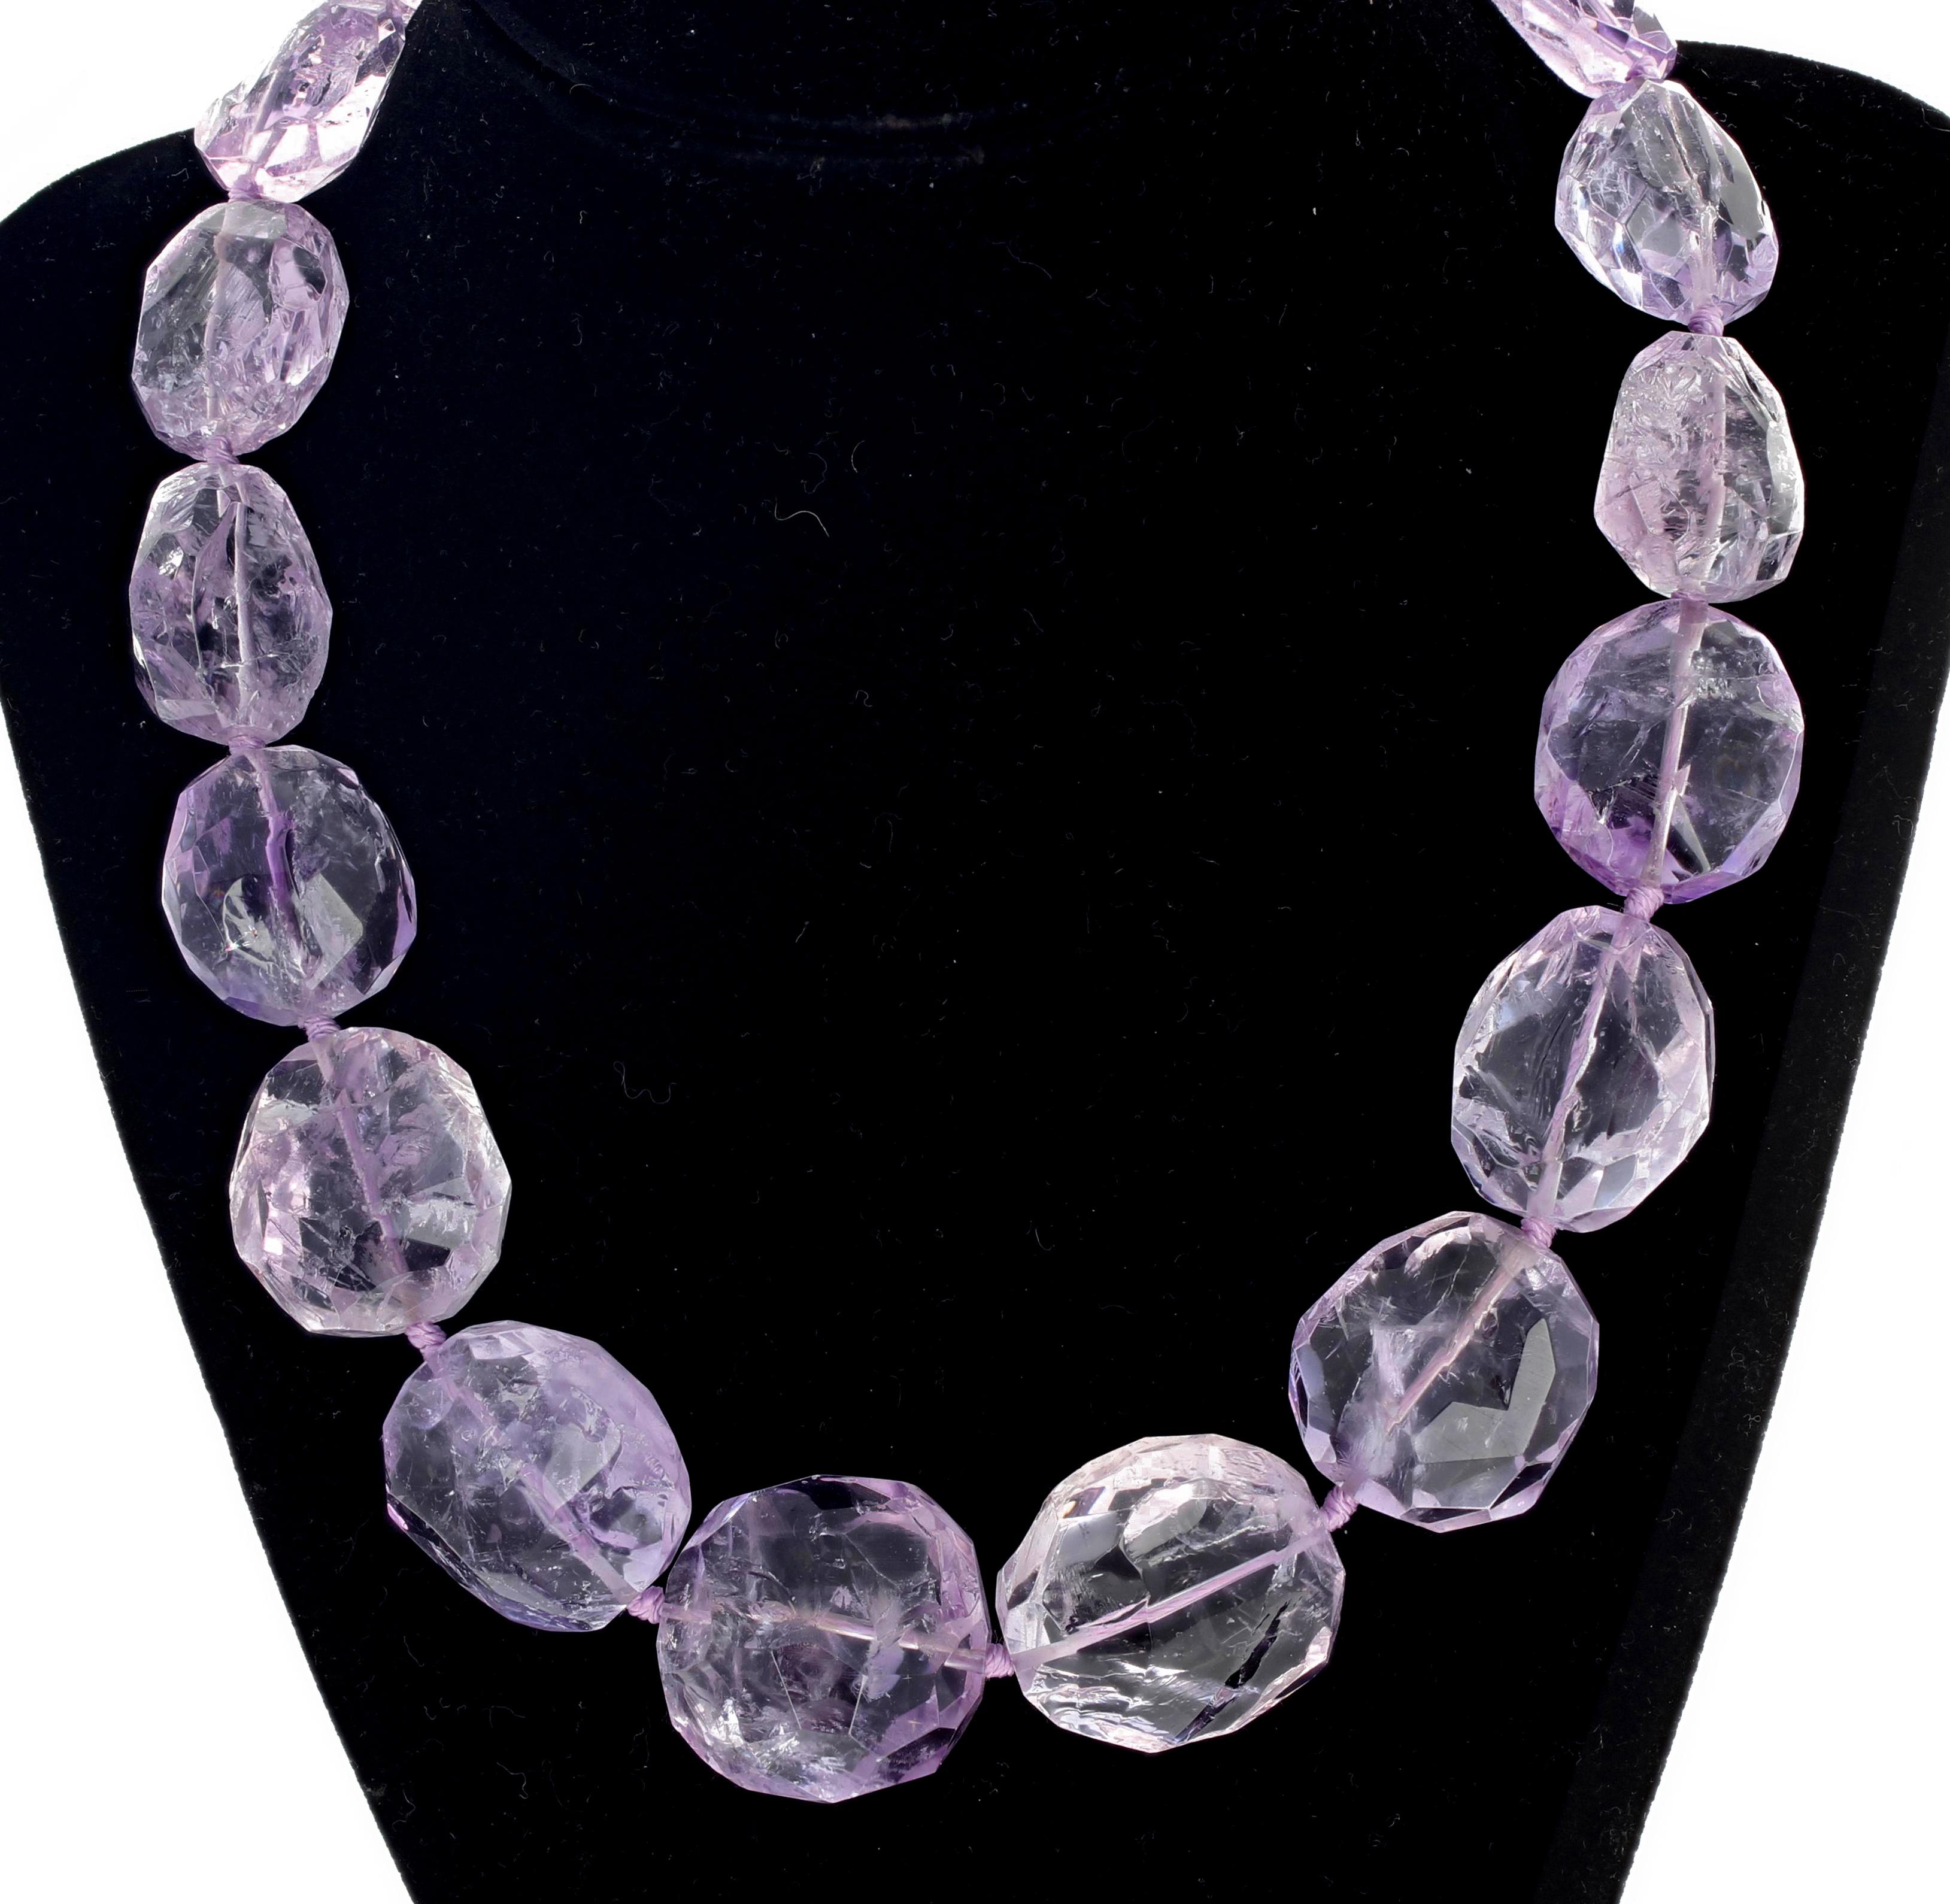 Glittering highly polished Rose of France Amethyst gemstones rocks compose this gorgeous pinkypurple 18.5 inch long handmade necklace.  The largest gemstone is approximately 28mm x 26 mm. 
